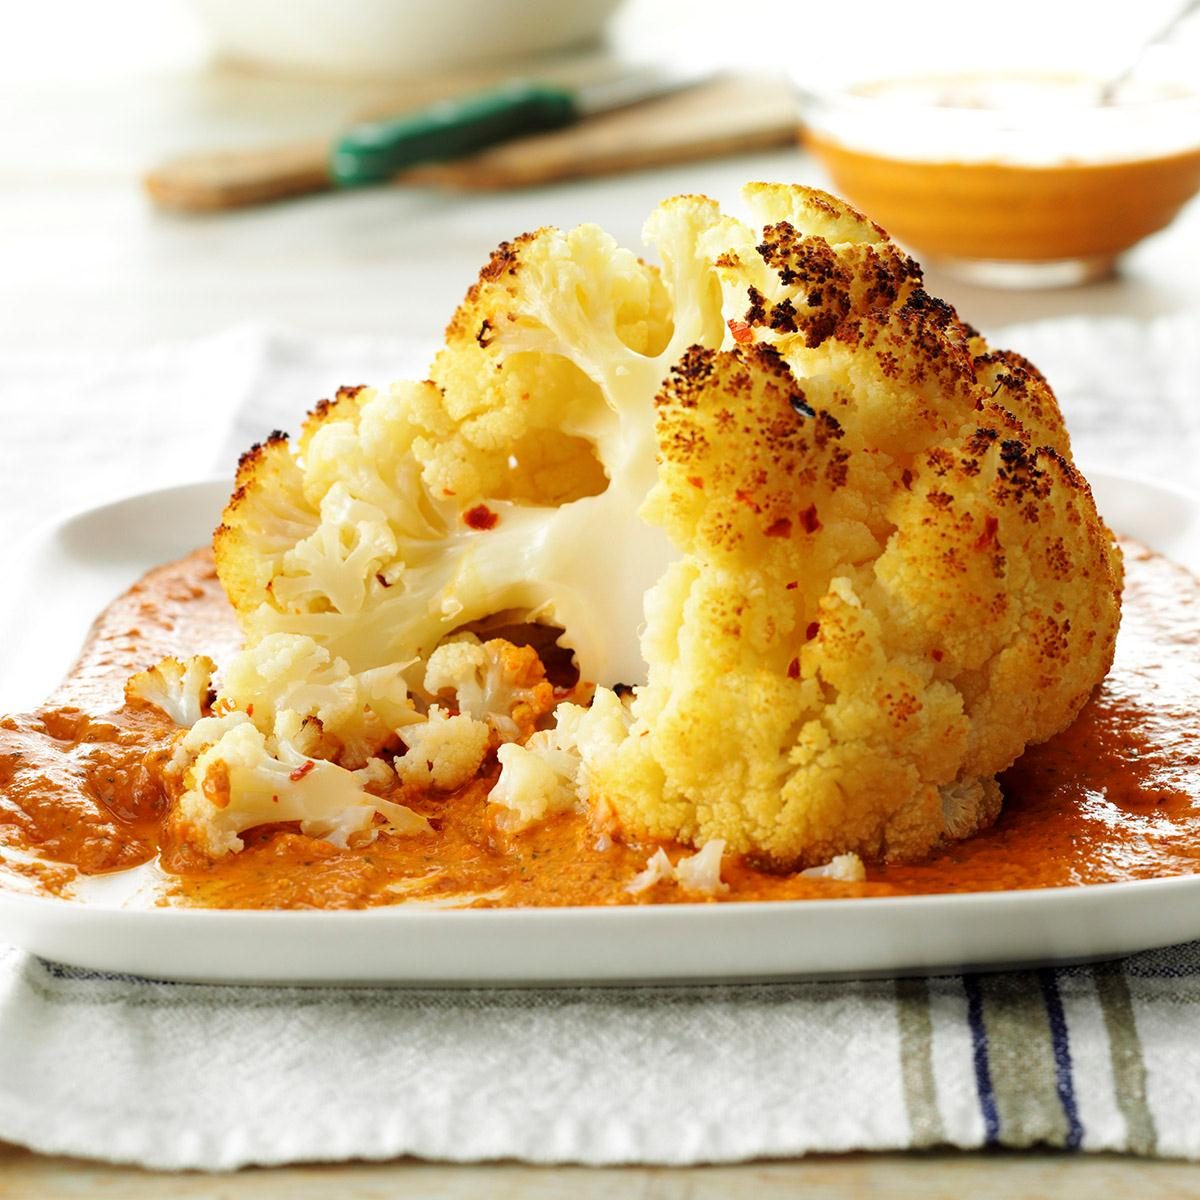 Cauliflower with Roasted Almond & Pepper Dip